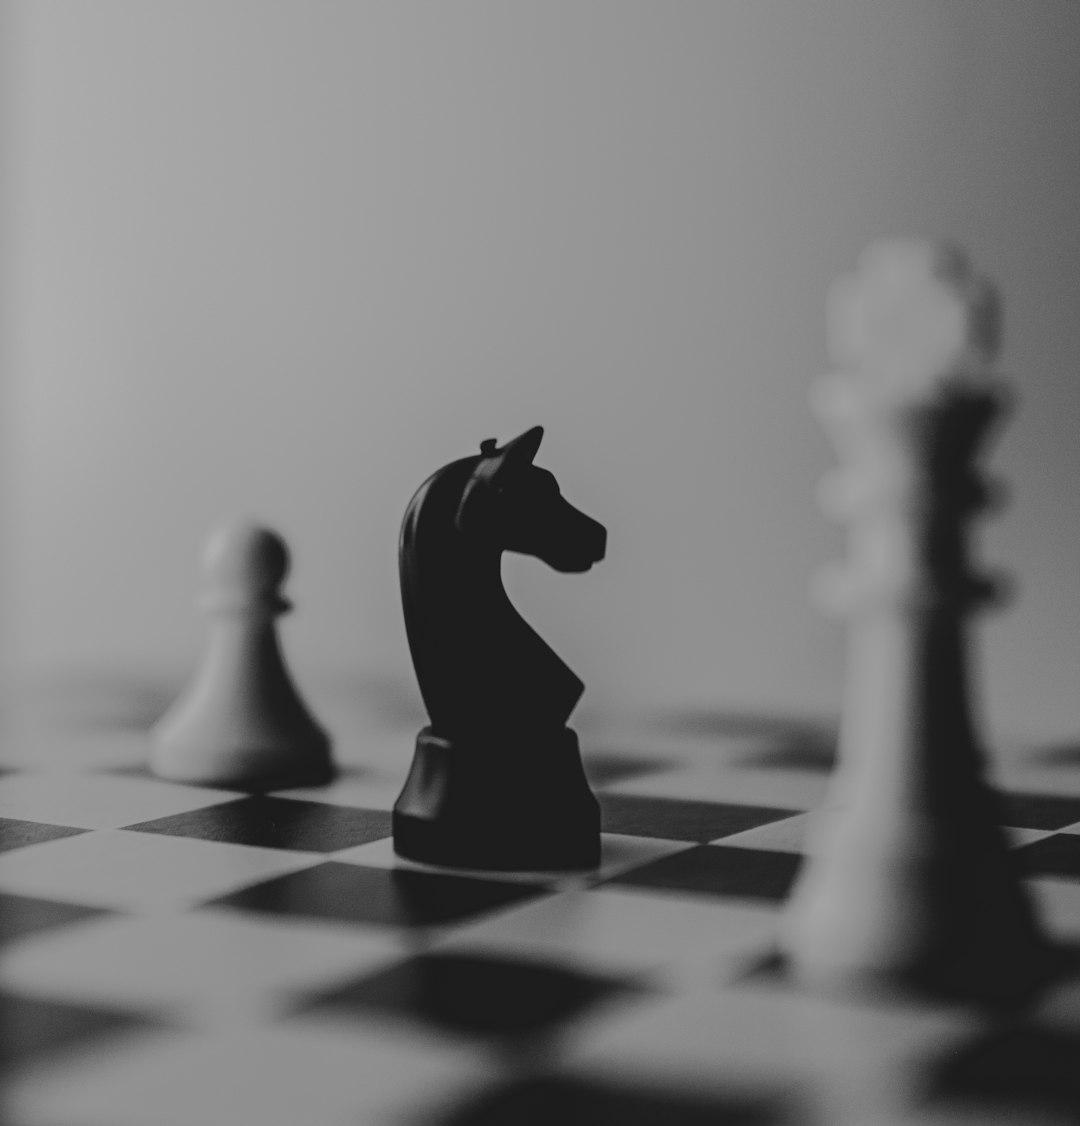 A Lesson From Chess: Make More Progress By Doing Less